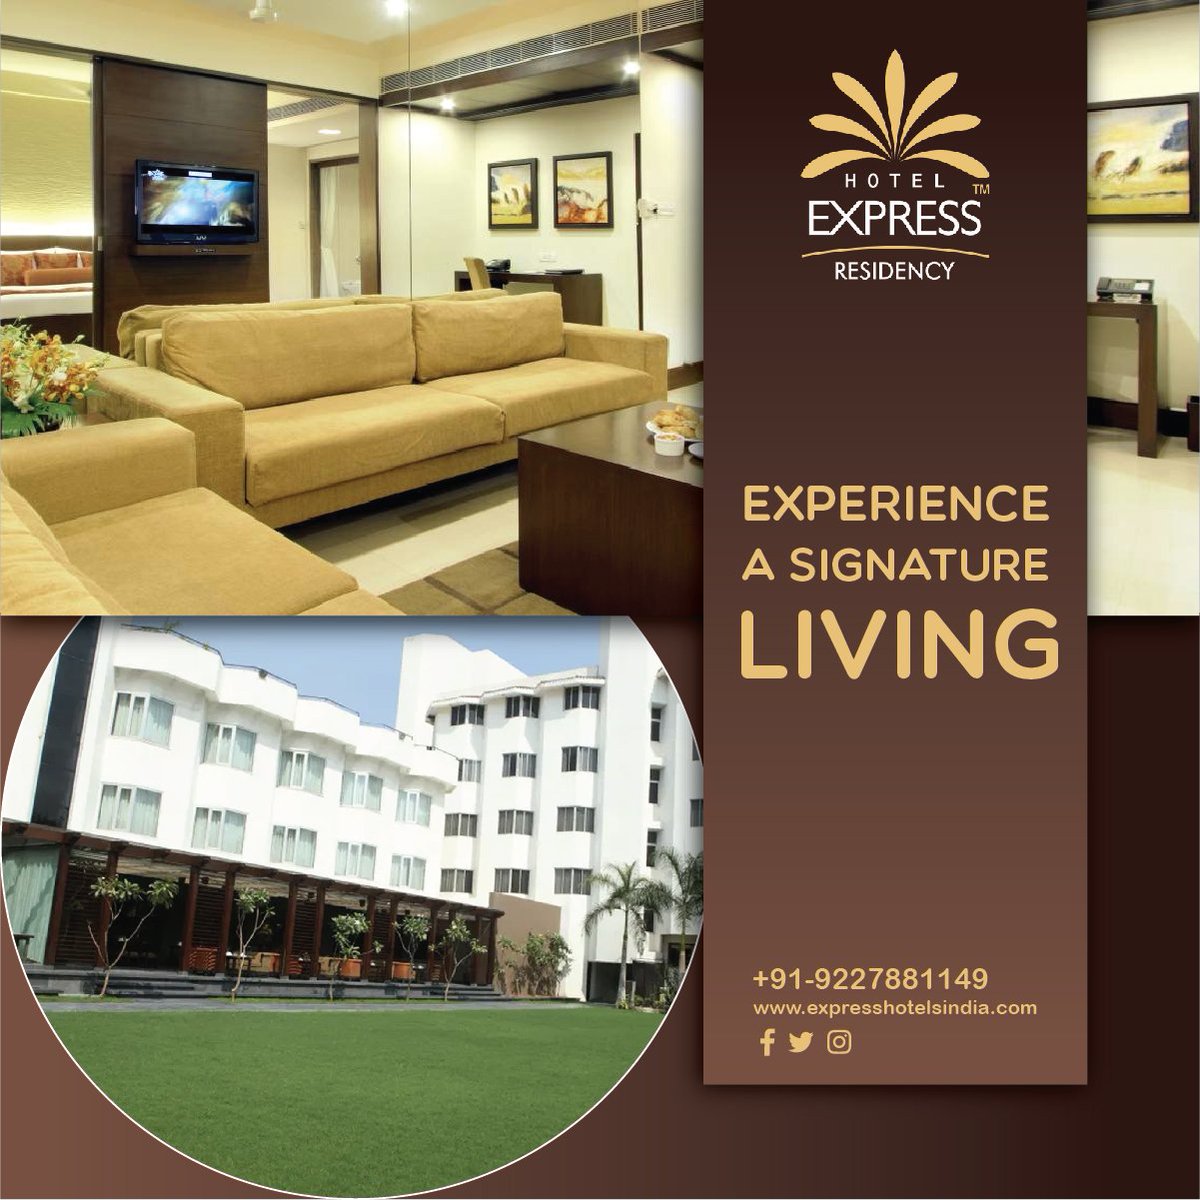 It is more about experiencing a signature living and quality life. Do visit us today!
.
#luxurylifestyle #4starhotel #luxuryblog #star #fourstar #hotels #life #bucketlist #view #workoutwednesday #expressresidency #sanskarinagri #vadodara